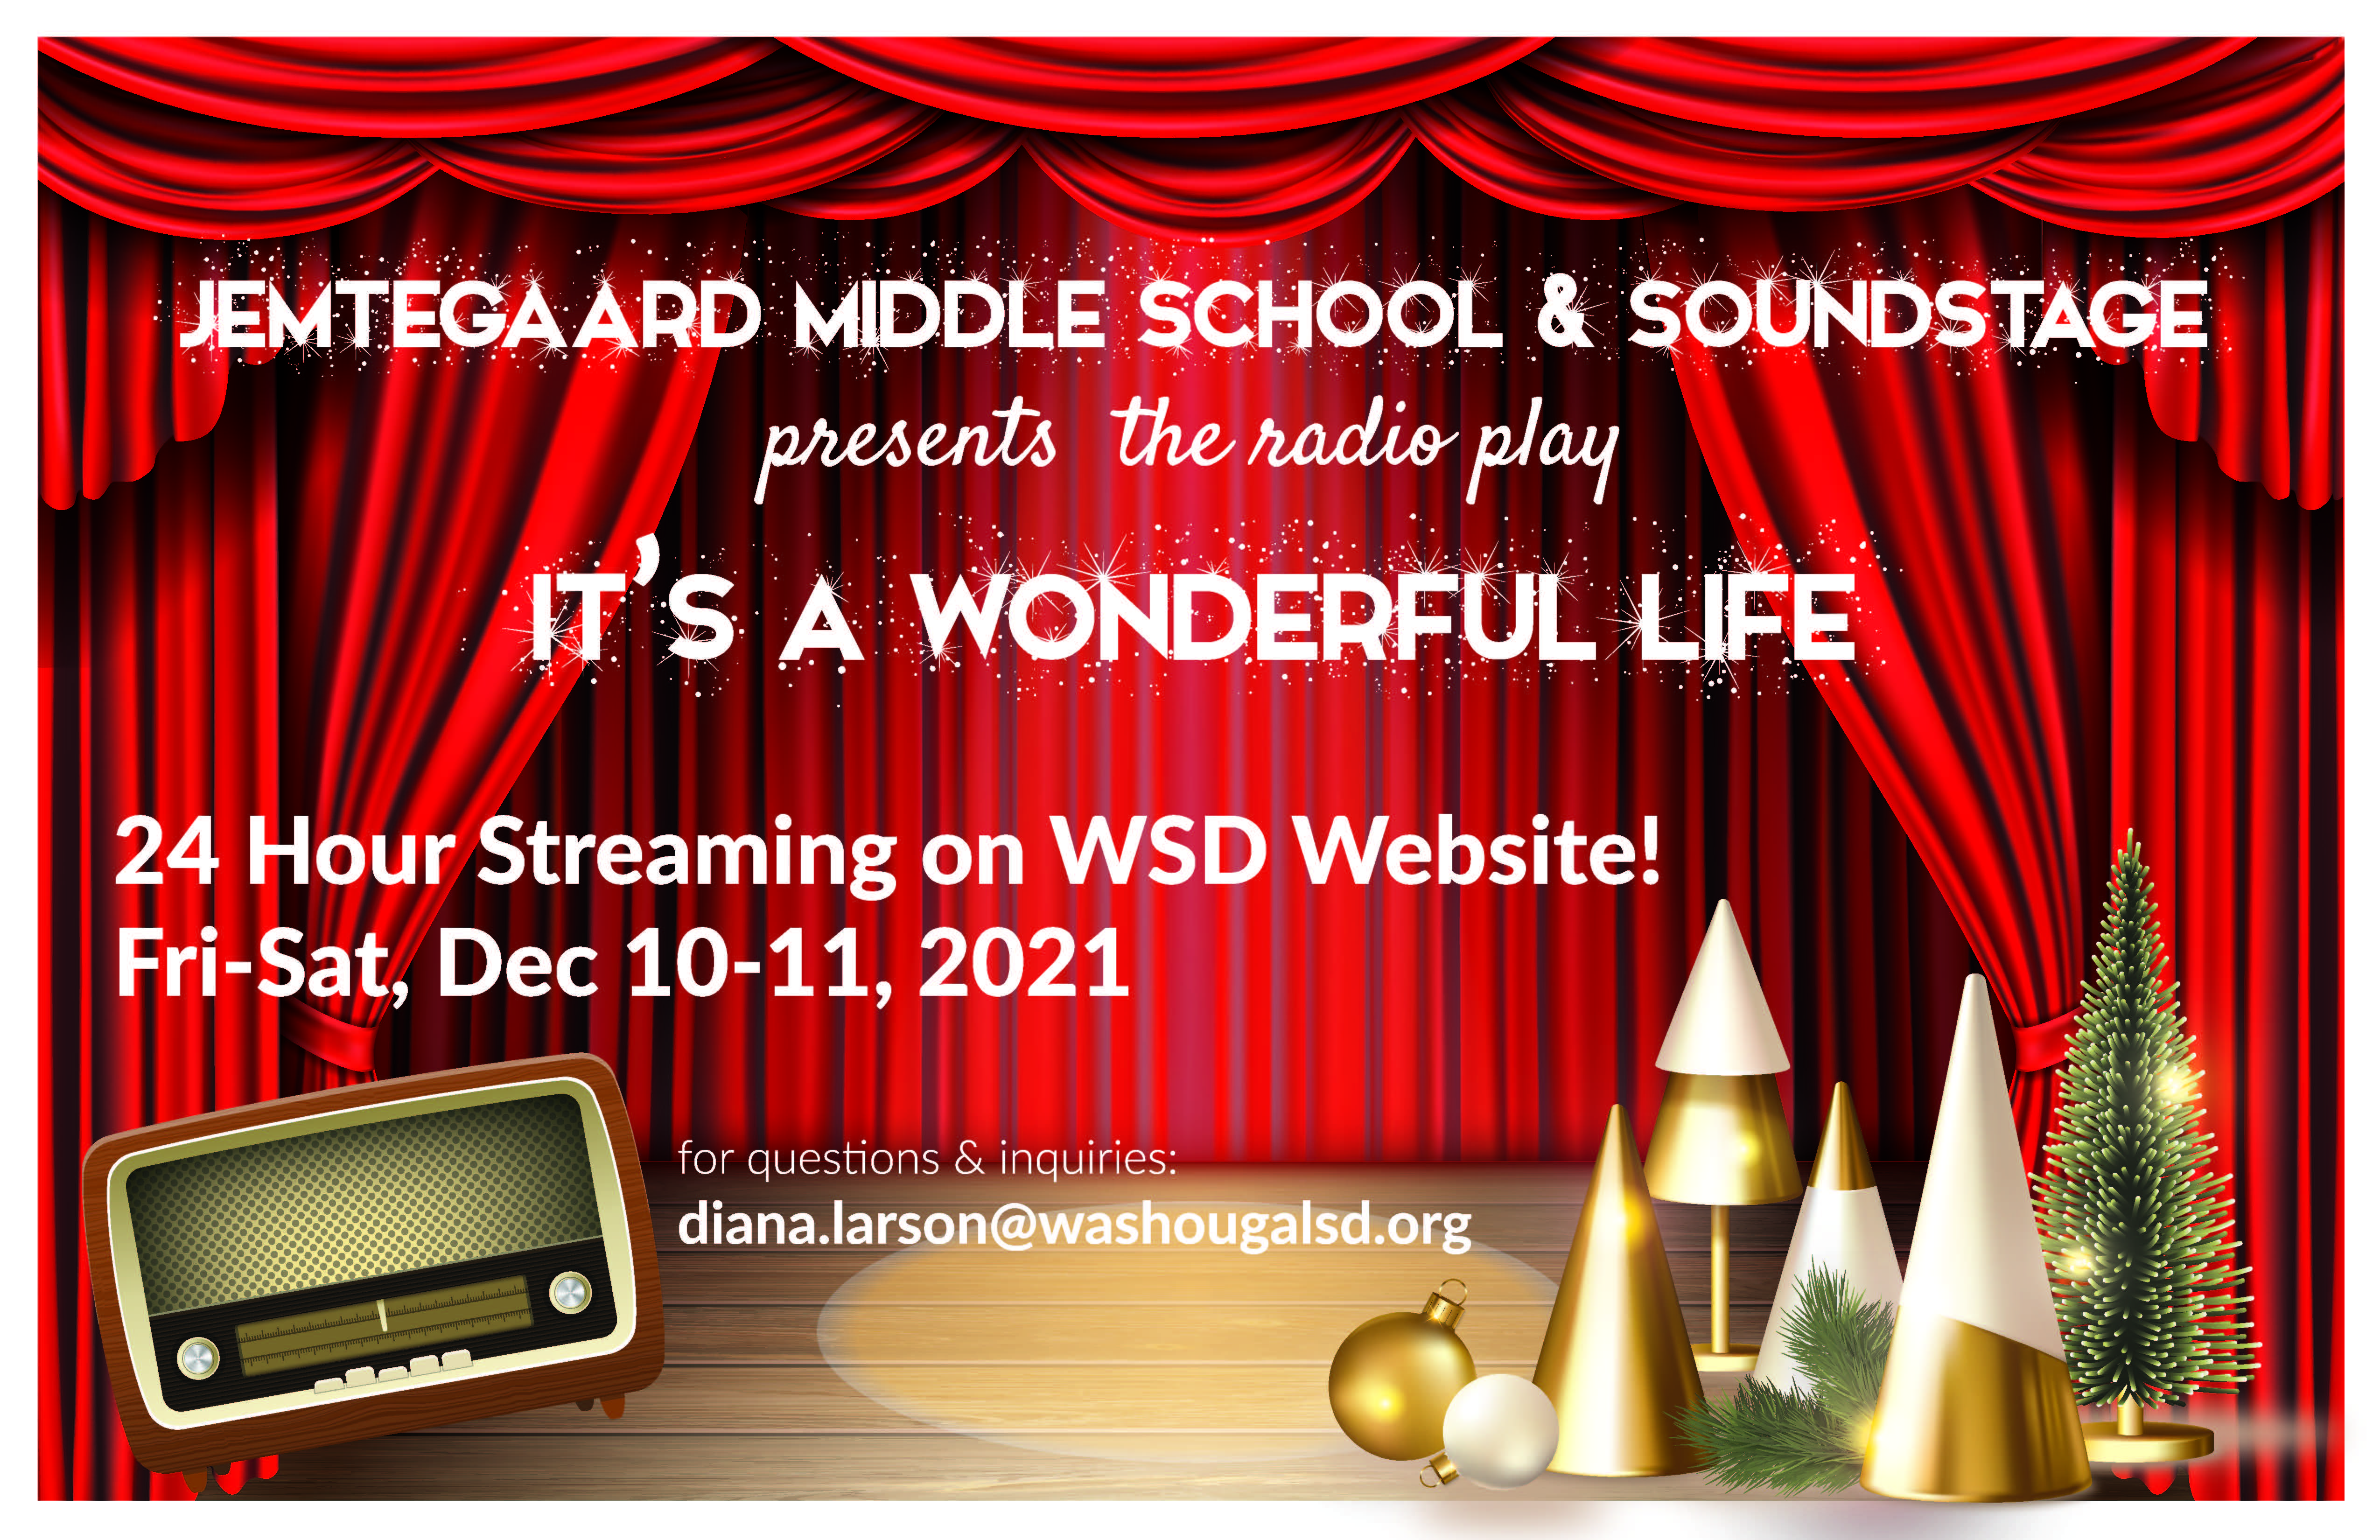 Jemtegaard Middle School & Soundstage present the radio play Its a wonderful life 24 hour streaming on WSD website Fri-Sat Dec 10 & 11, 2021. For questions & inquiries, diana larson @ WSD email with red curtains and theatre stage, old fashioned radio and holiday decor